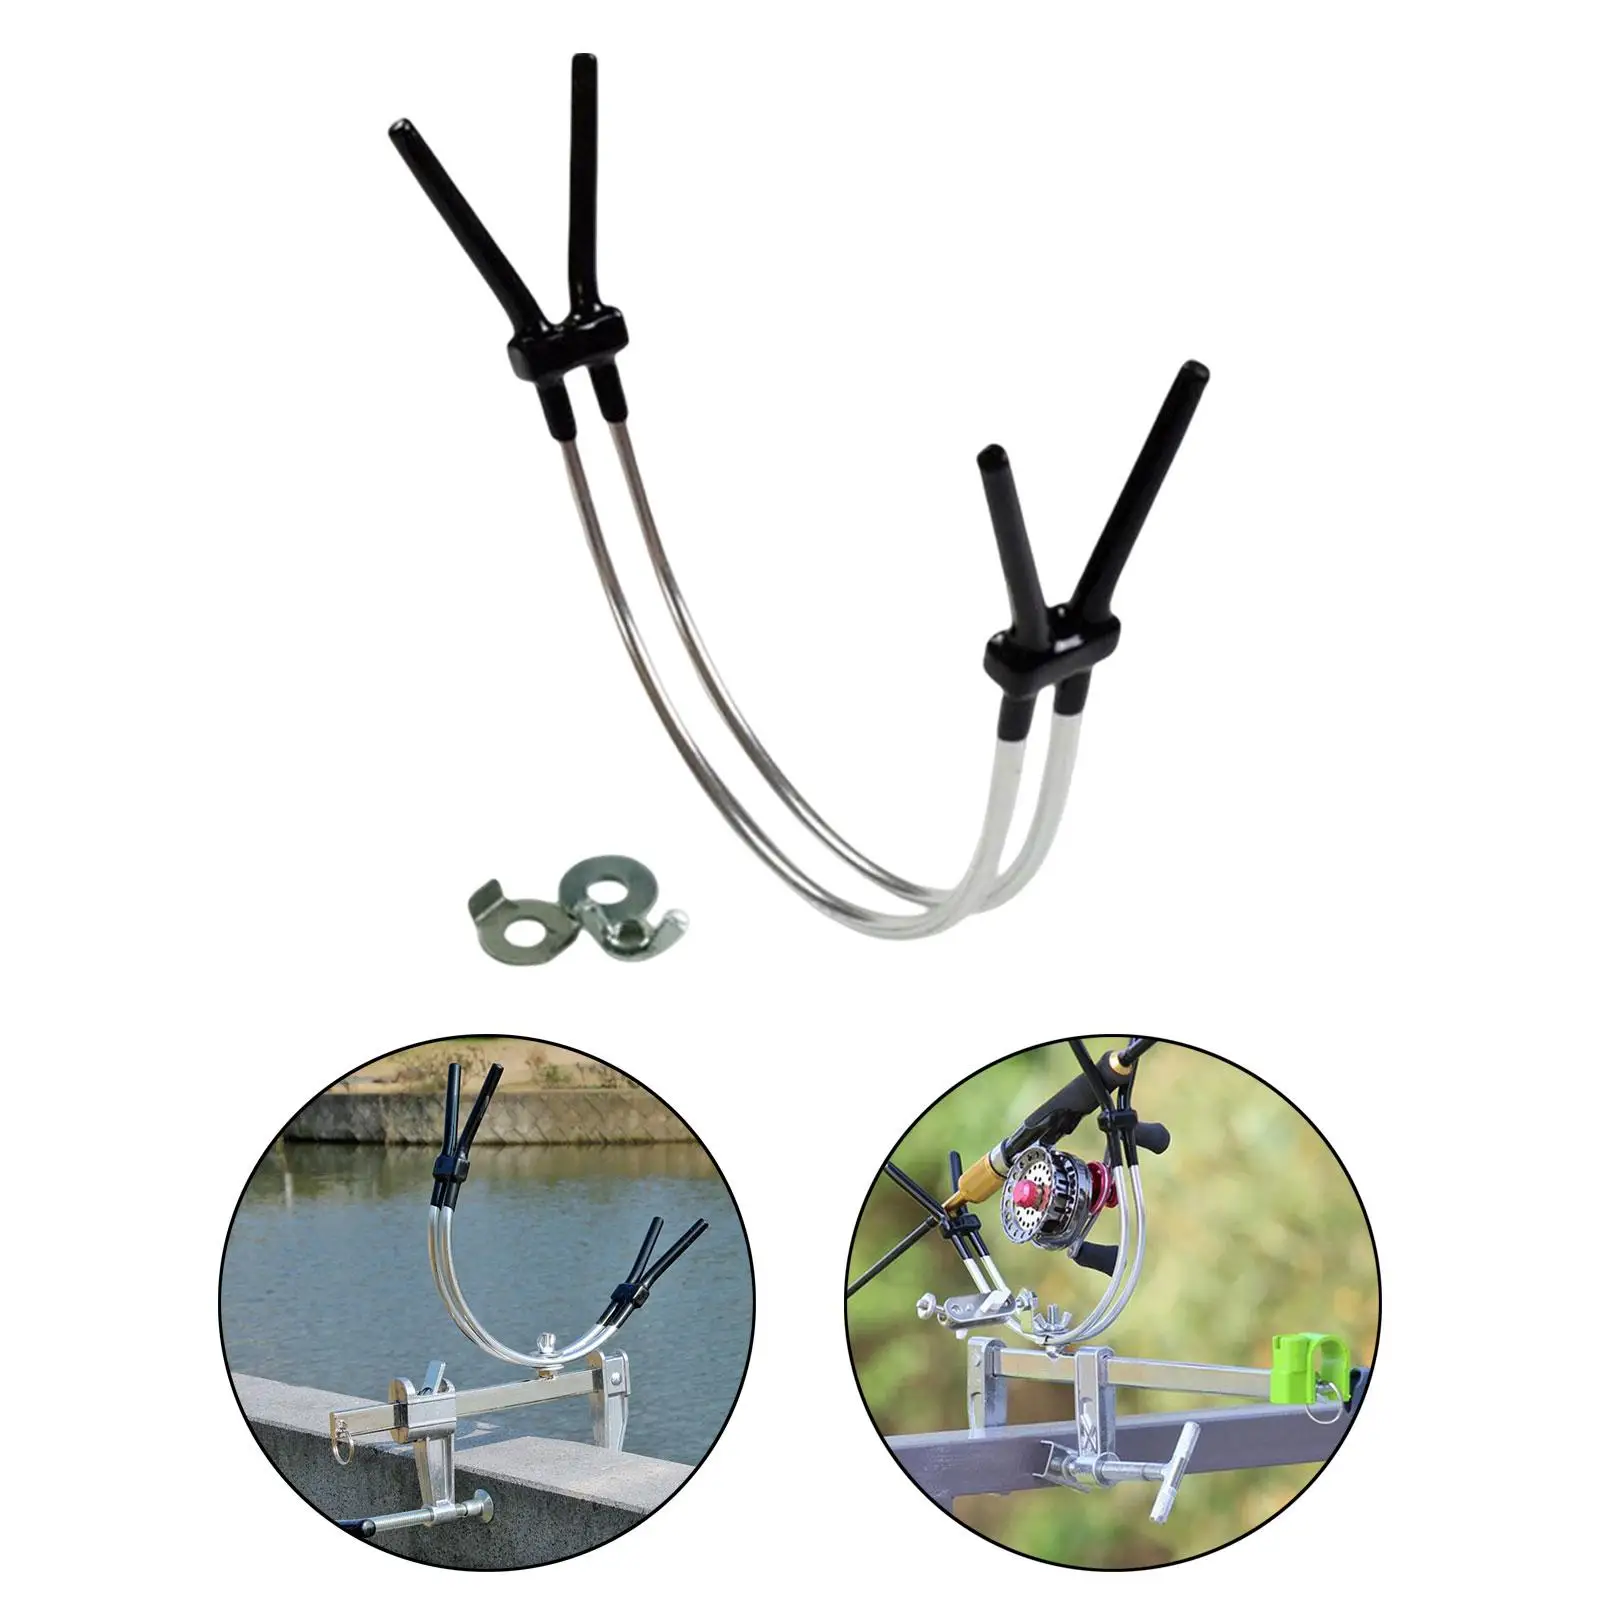 Fishing Rod Holder Fishing Pole Holder Fishing Rod Pole Stand Device Fishing Tackle Tool Fishing Rod Bracket for Boat Fishing